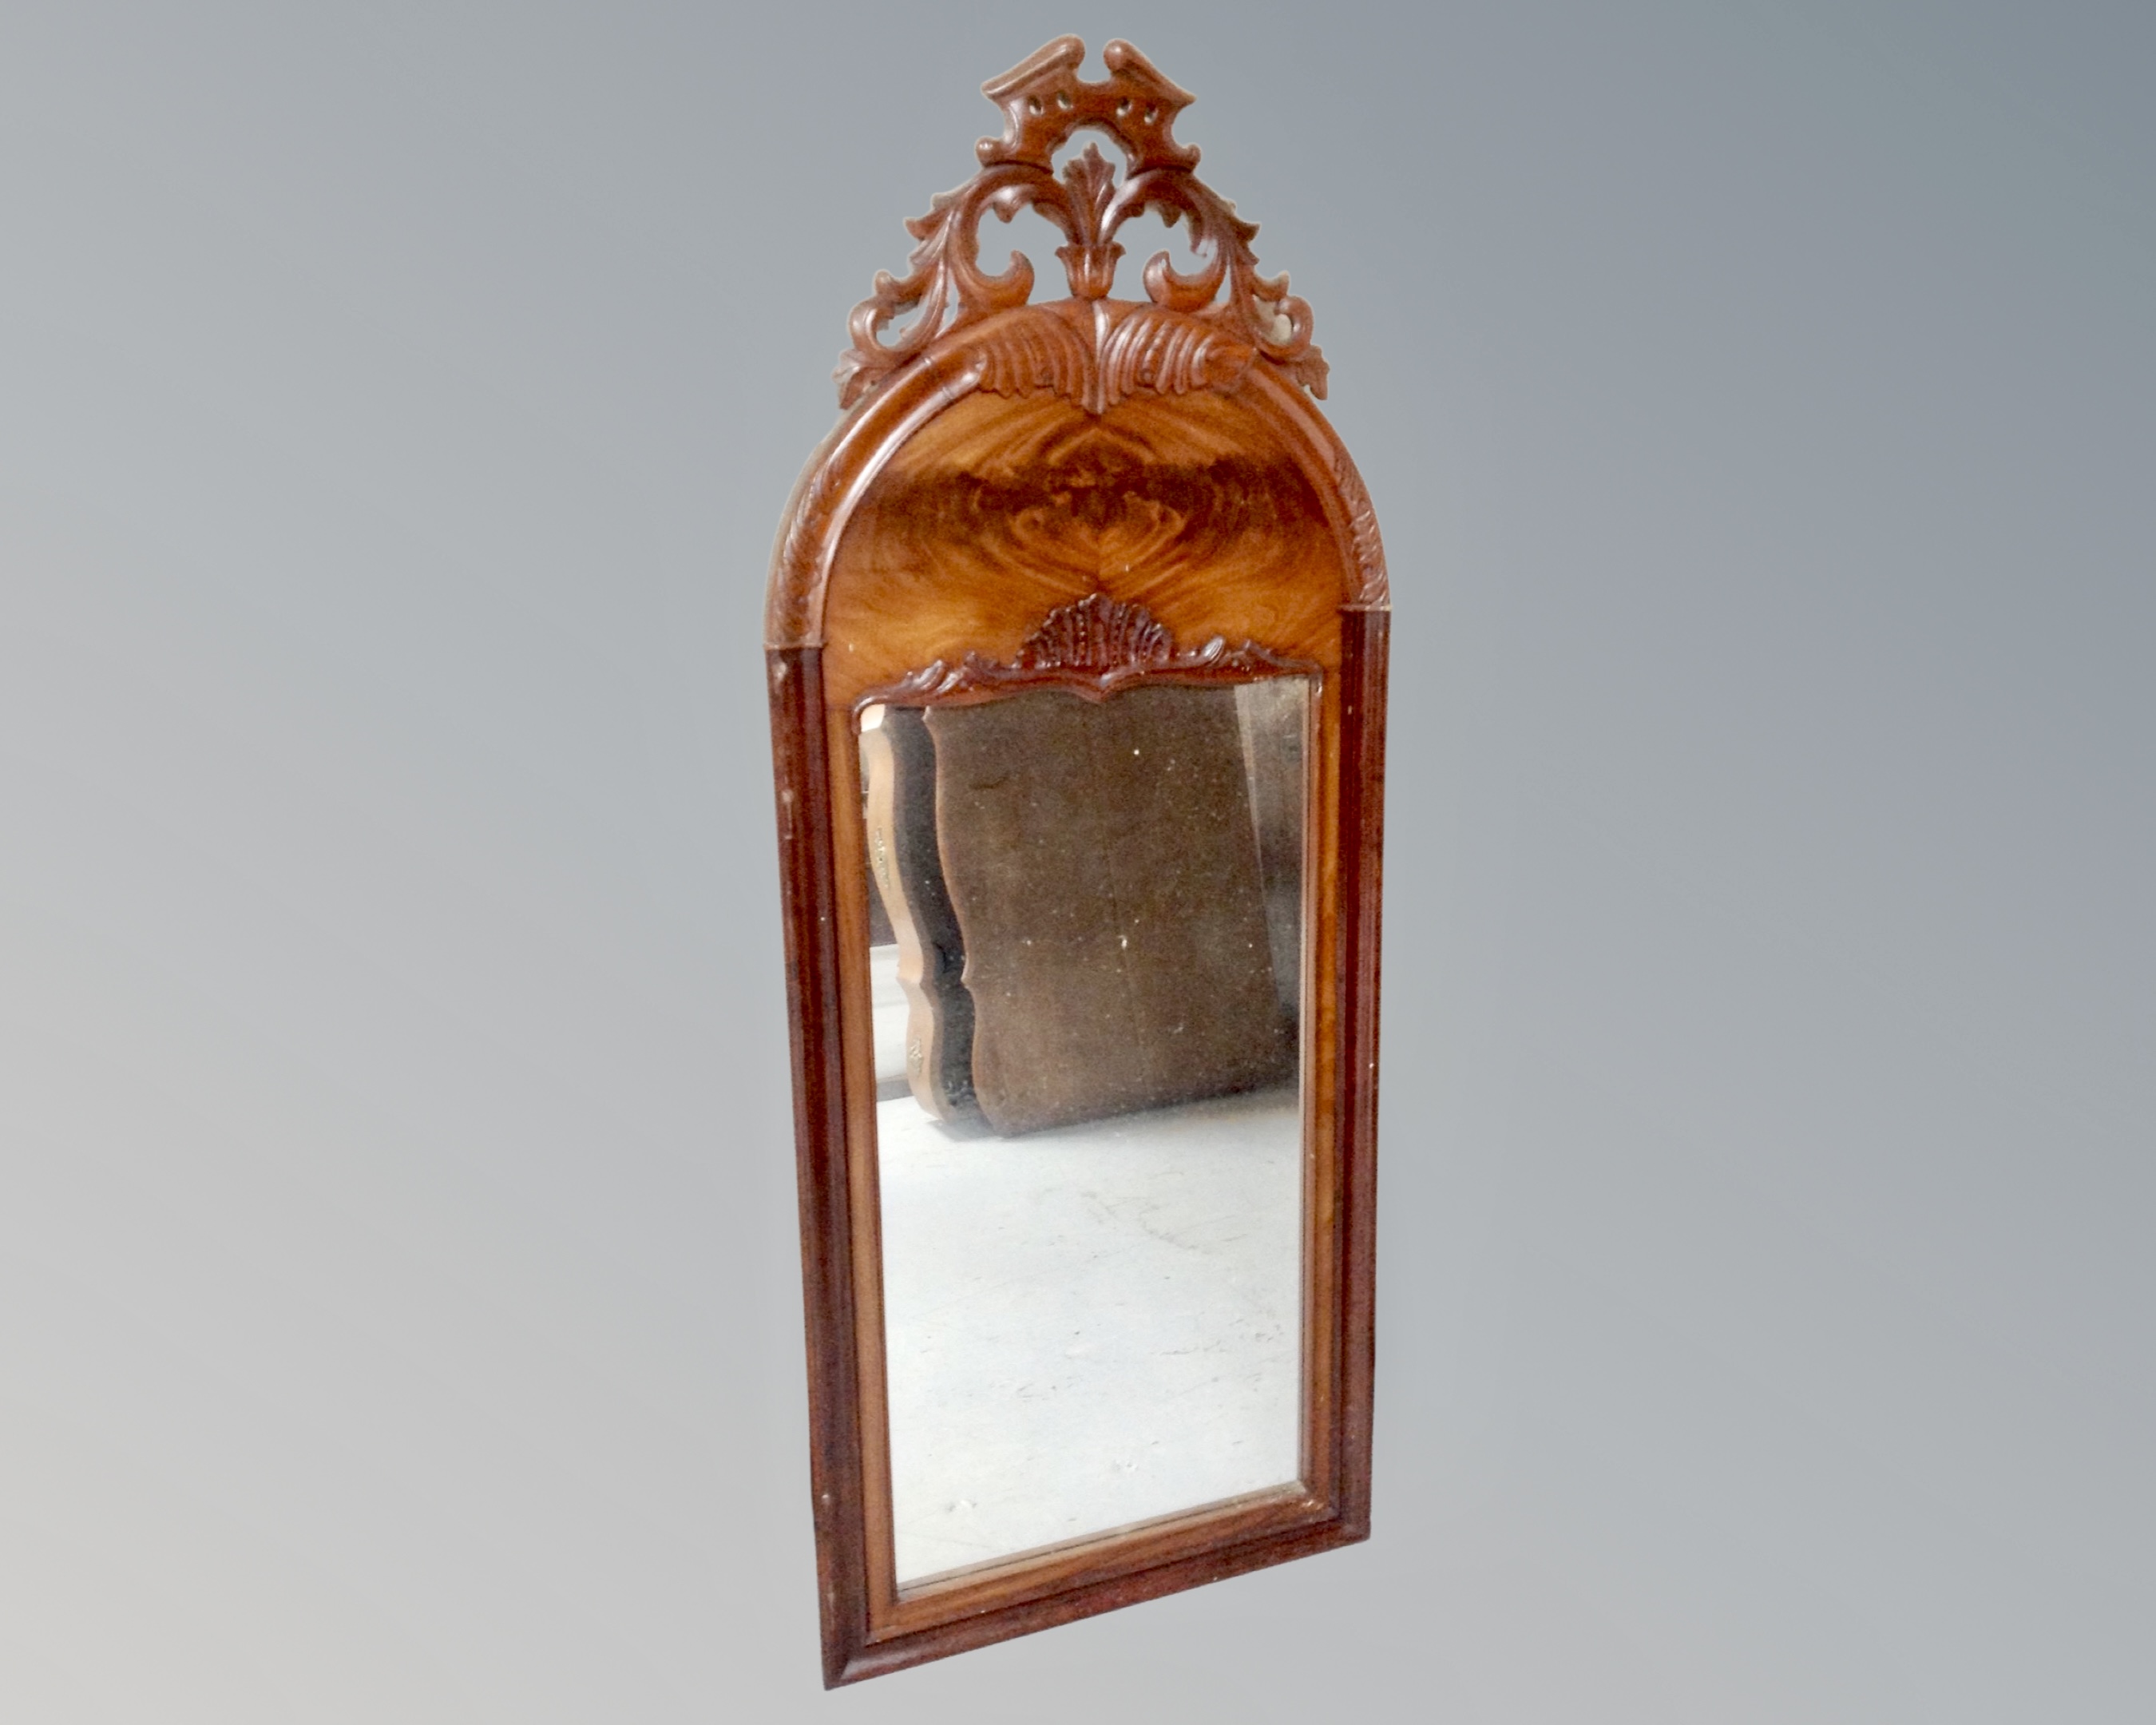 A continental 19th century mahogany mirror with arch top.